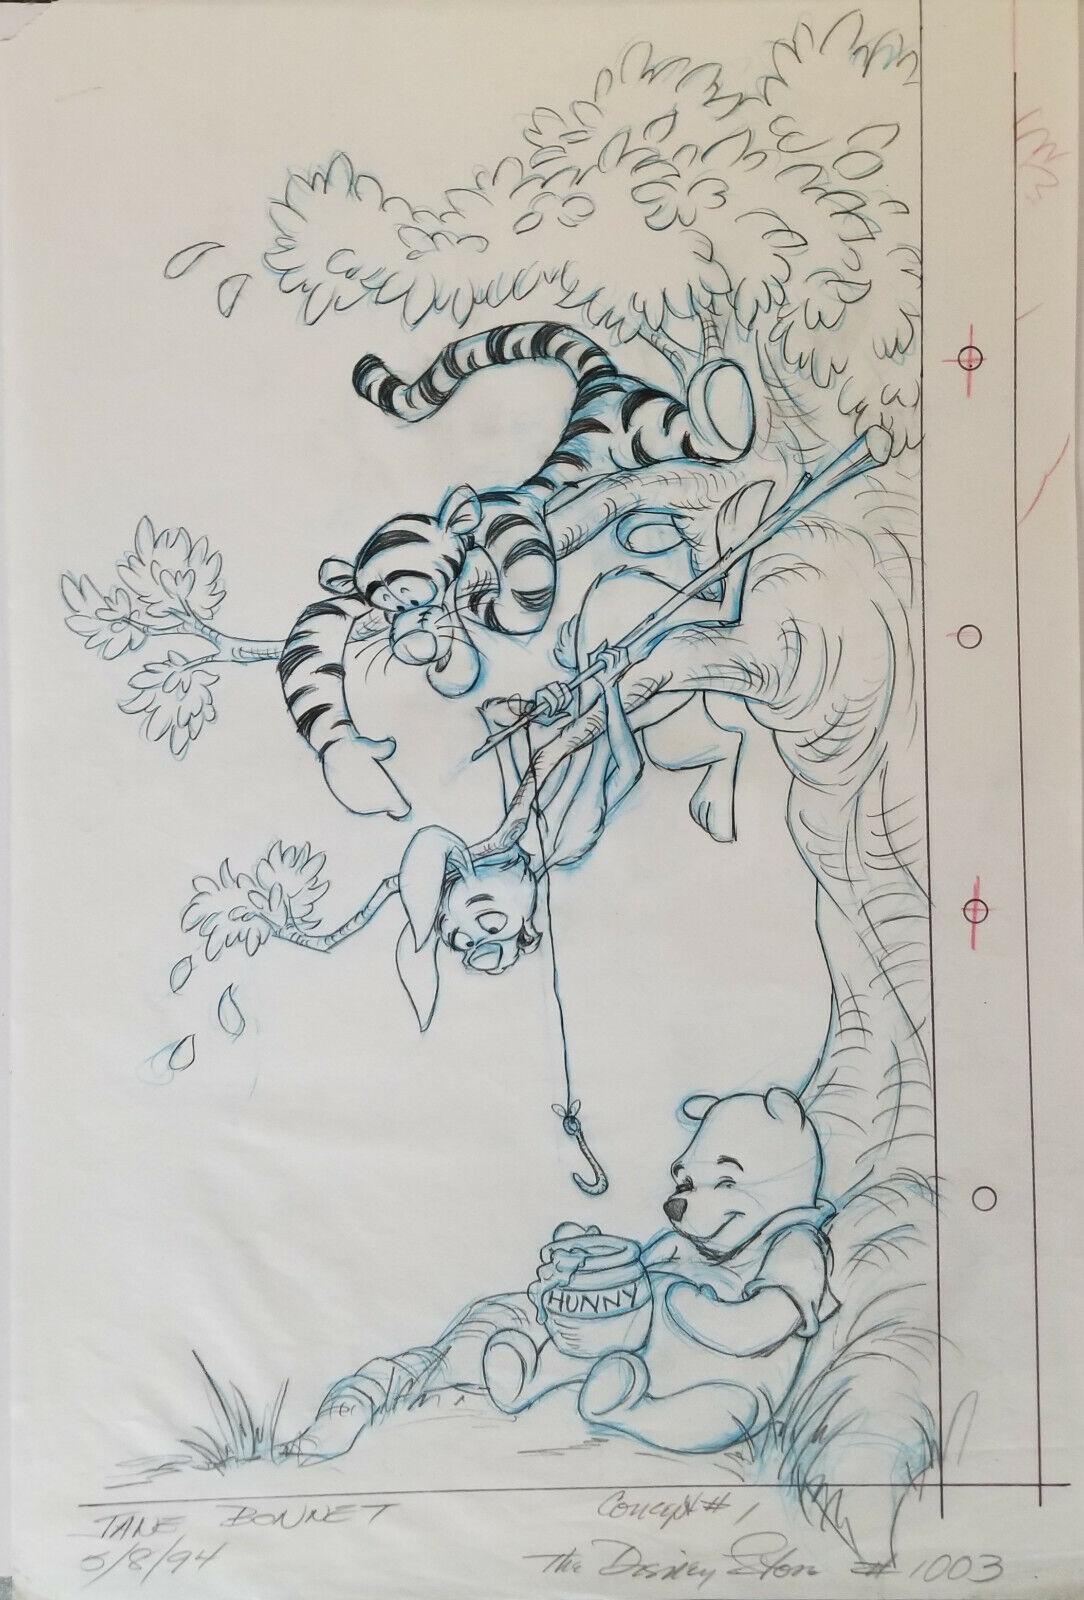 Winnie The Pooh and Friends: Original Concept Drawing signed by Jane Bonnet - Art by Walt Disney Studio Artists